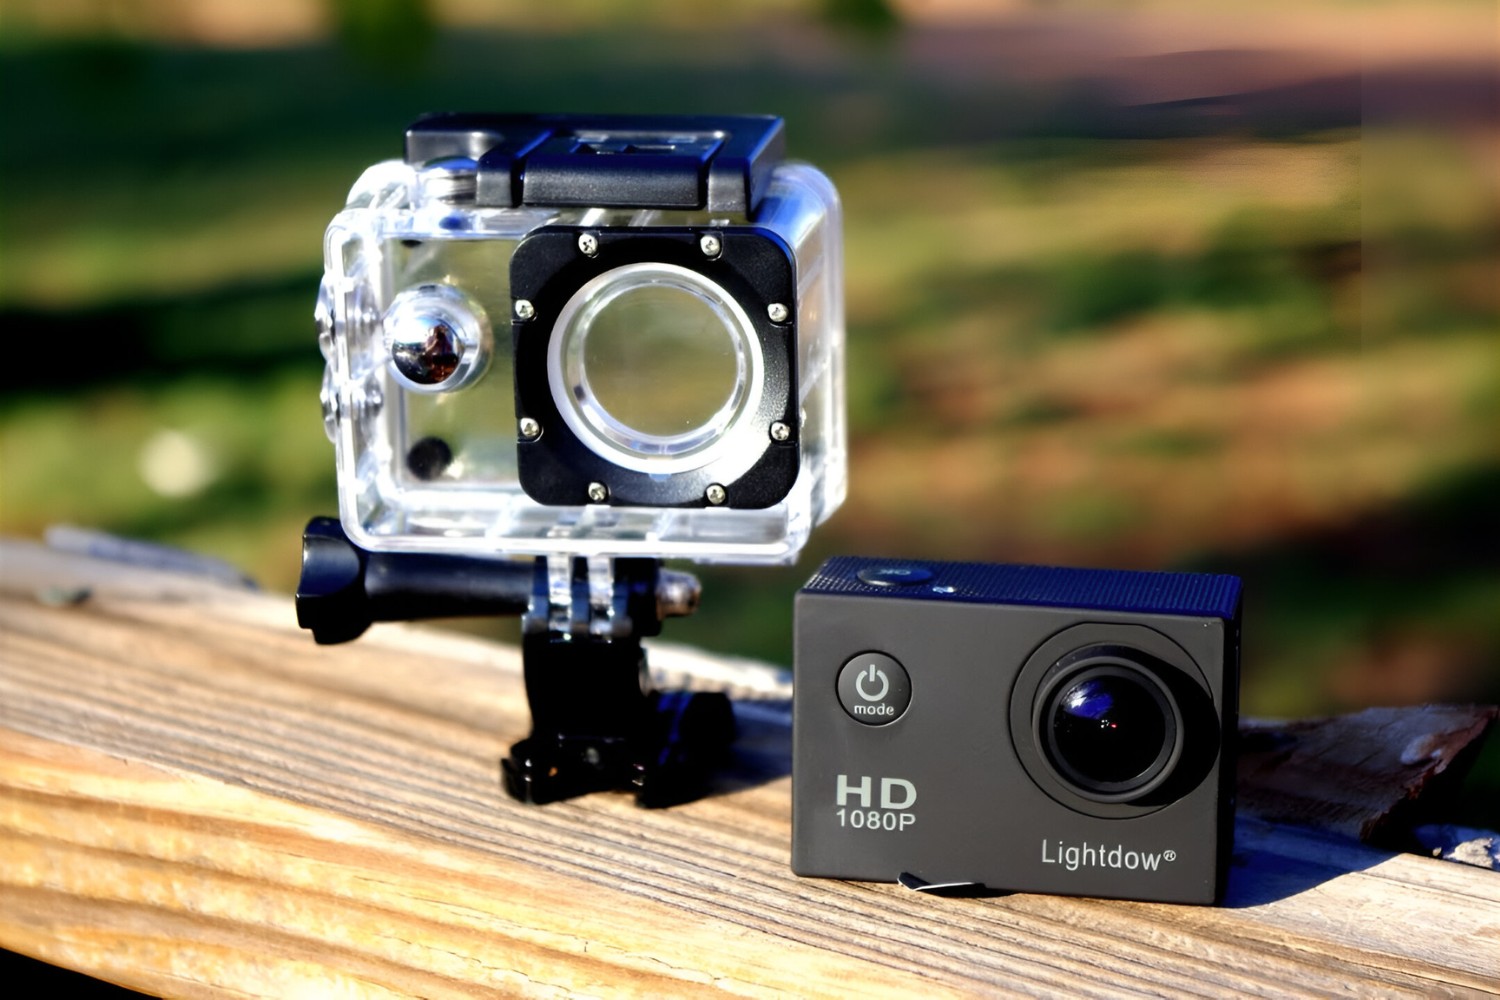 How To Set Up Wi-Fi On An Android Phone For Lightdow Action Camera